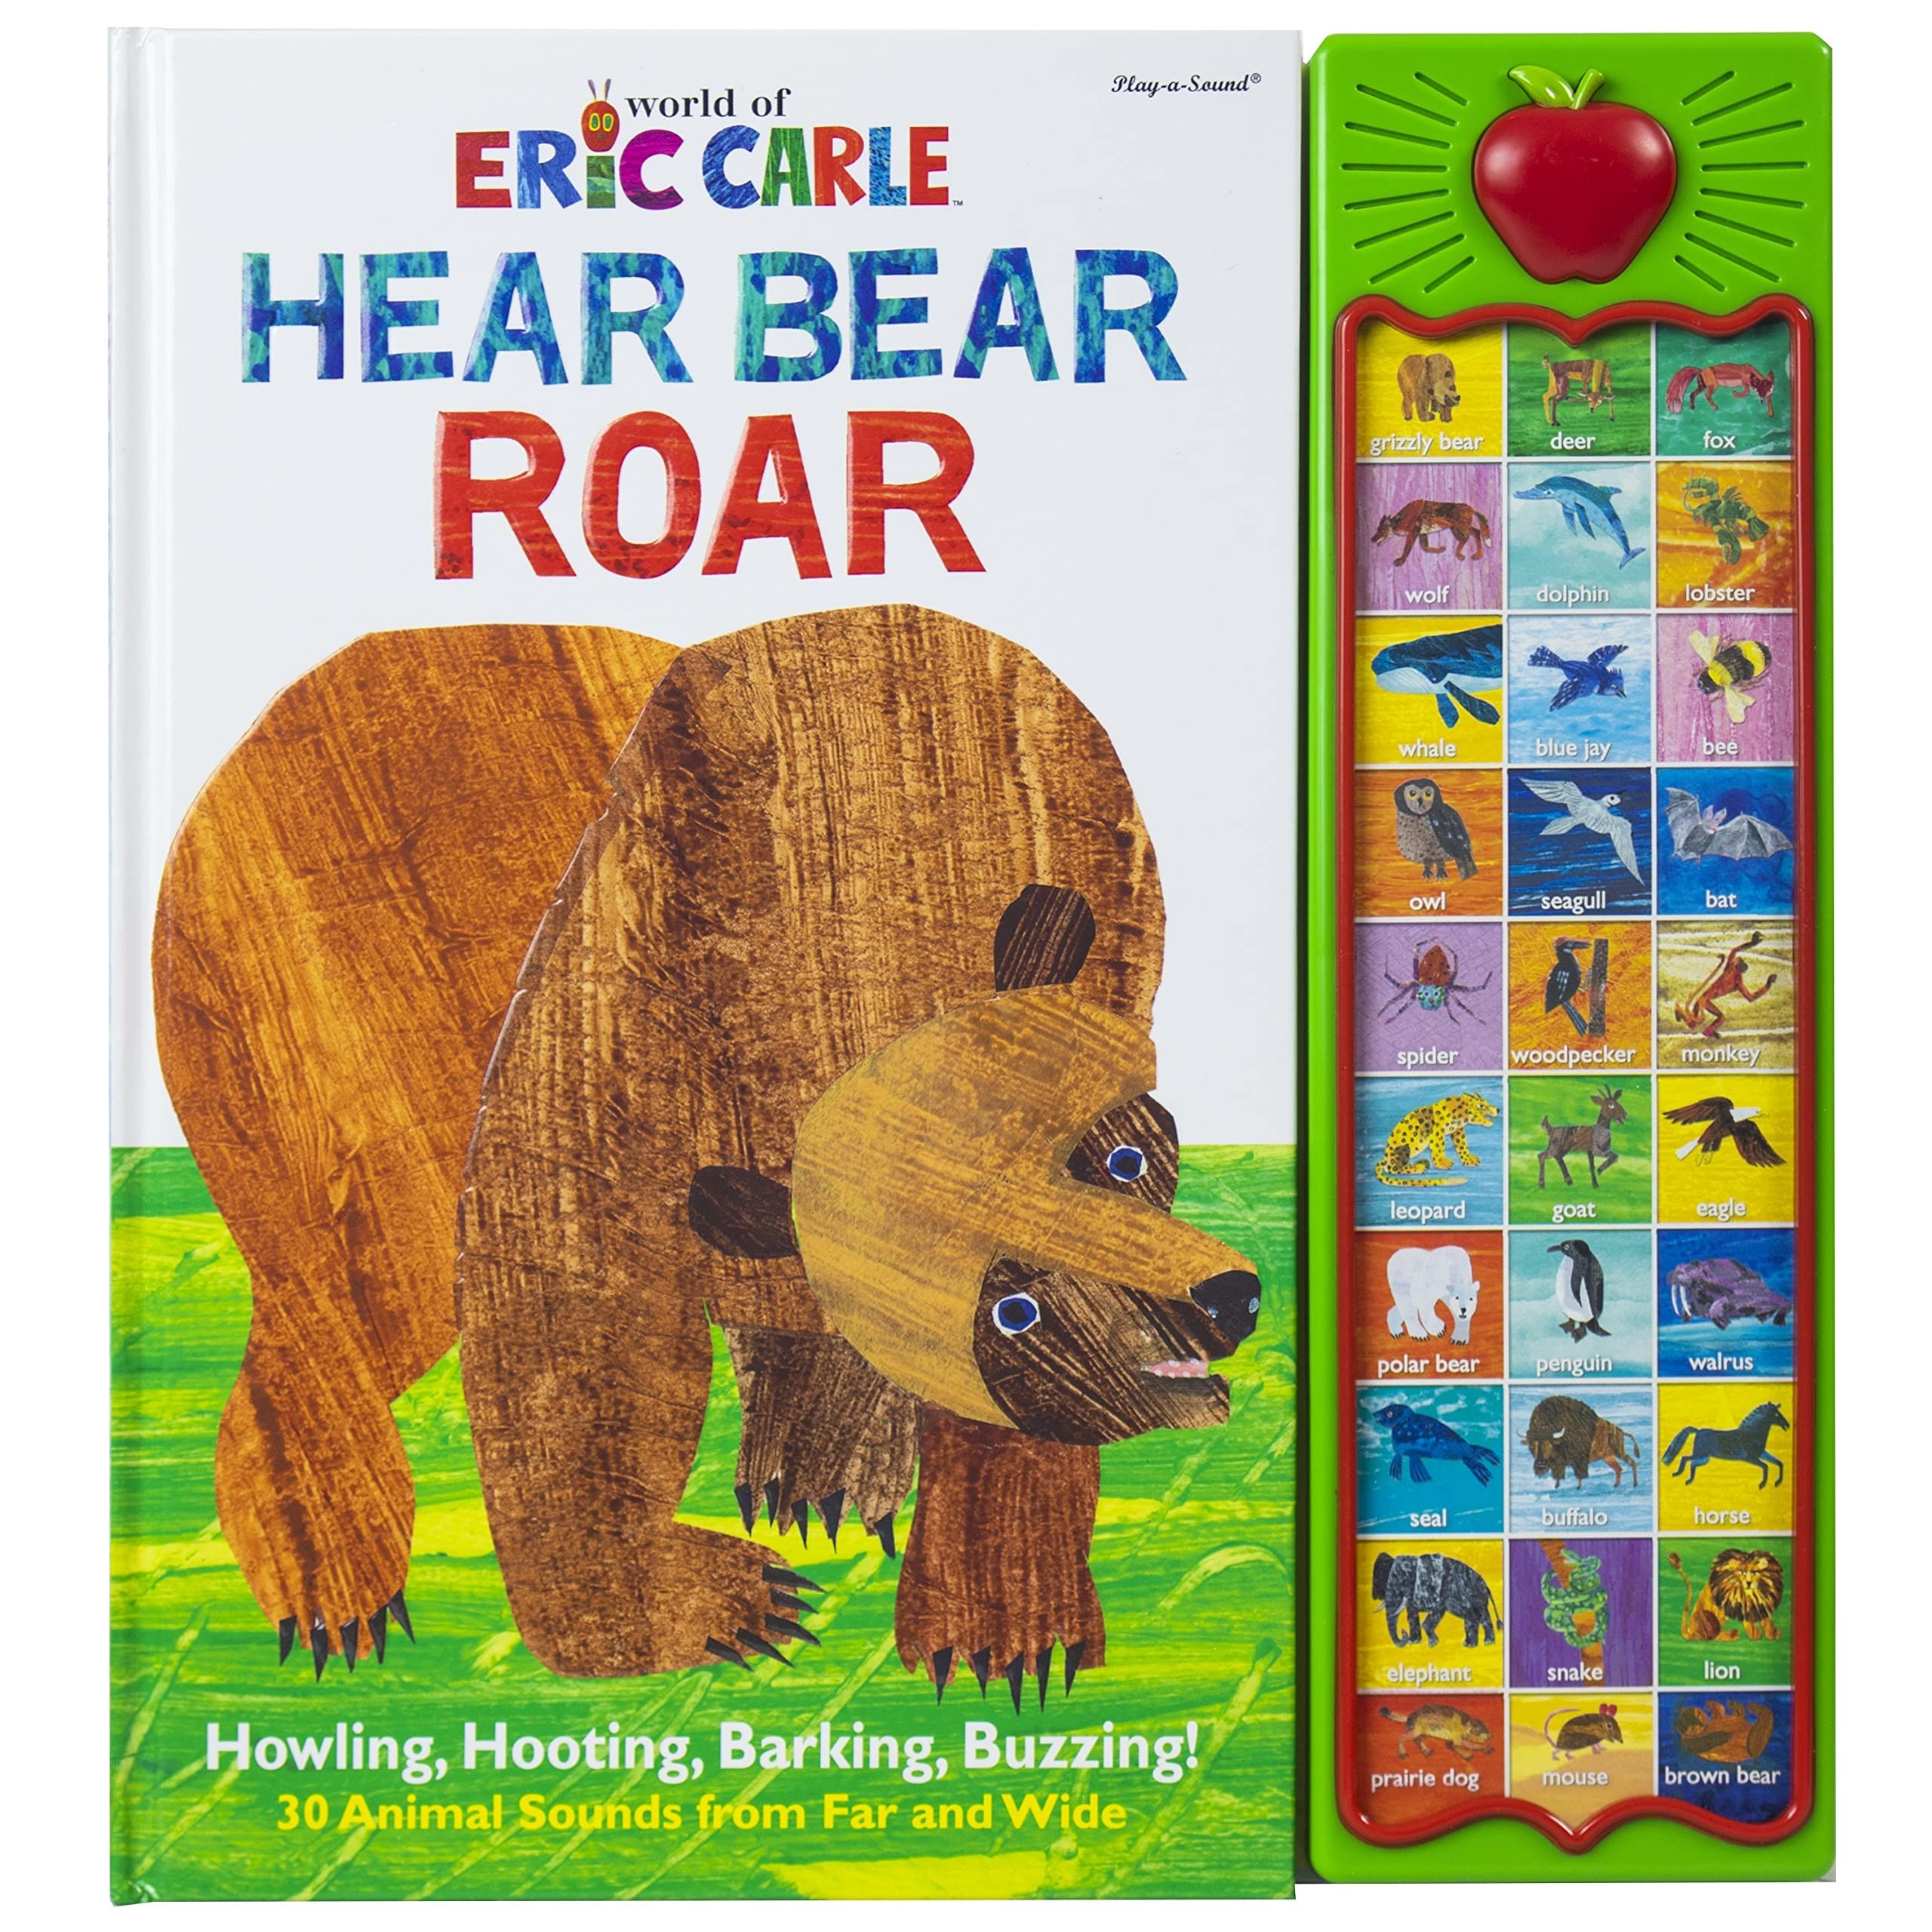 <p><strong>$12.14</strong></p><p>Enter the gorgeous, fanciful world of picture book master Eric Carle with this gem that has 30 animal sound buttons for your kiddo to push. It's not the quietest book, but it sure is cute.</p>